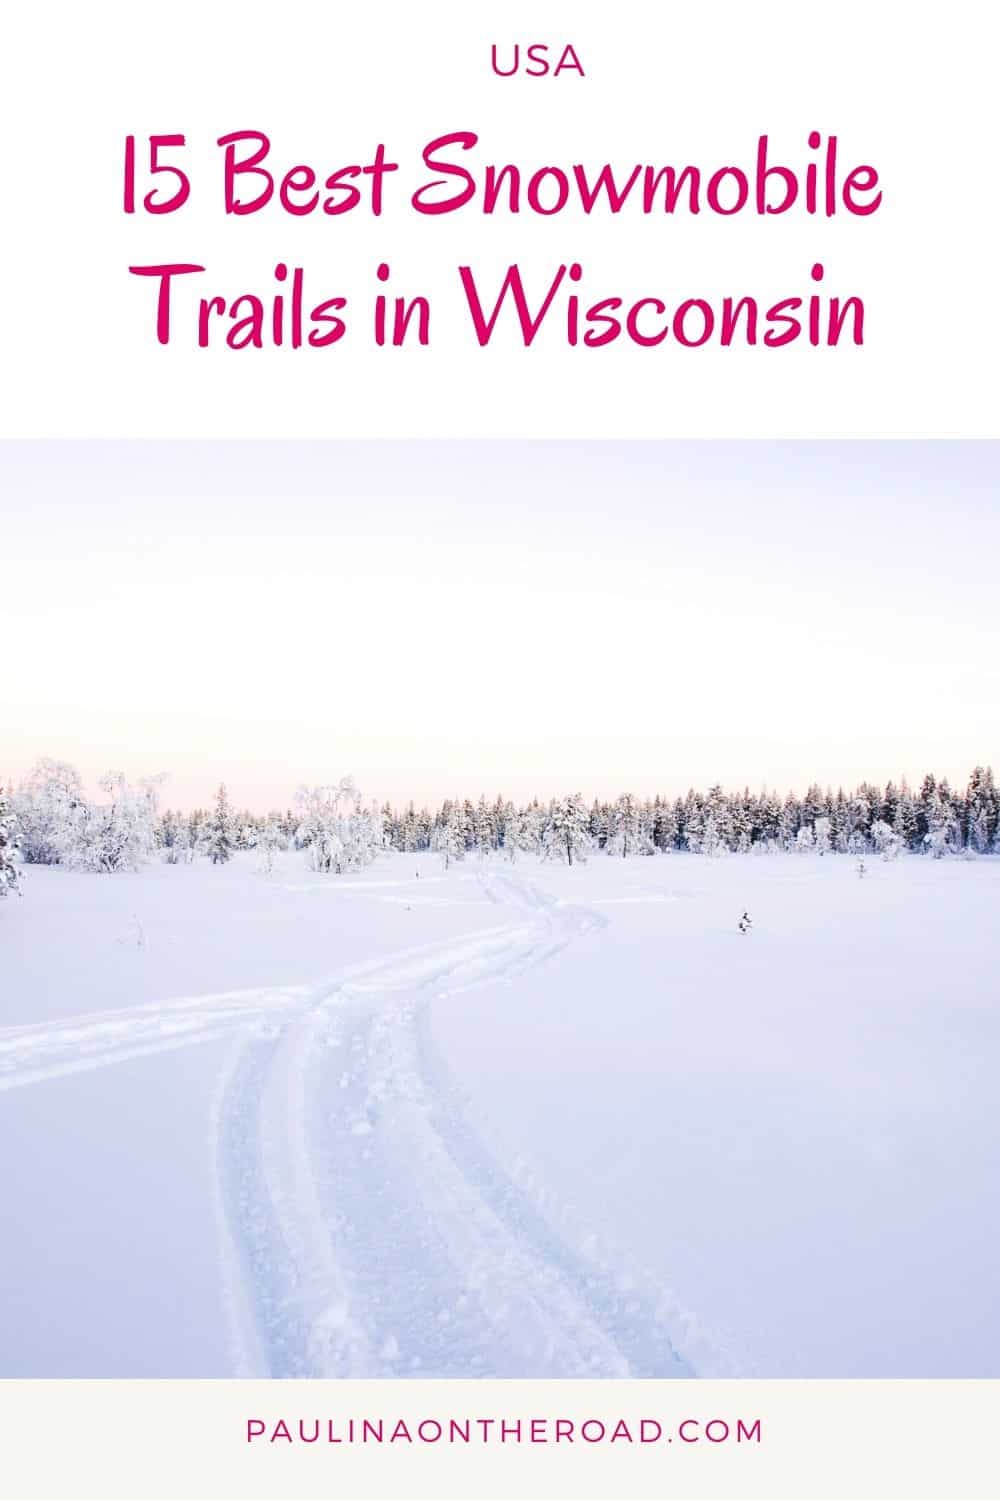 15 Best Snowmobile Trails in Wisconsin Paulina on the road